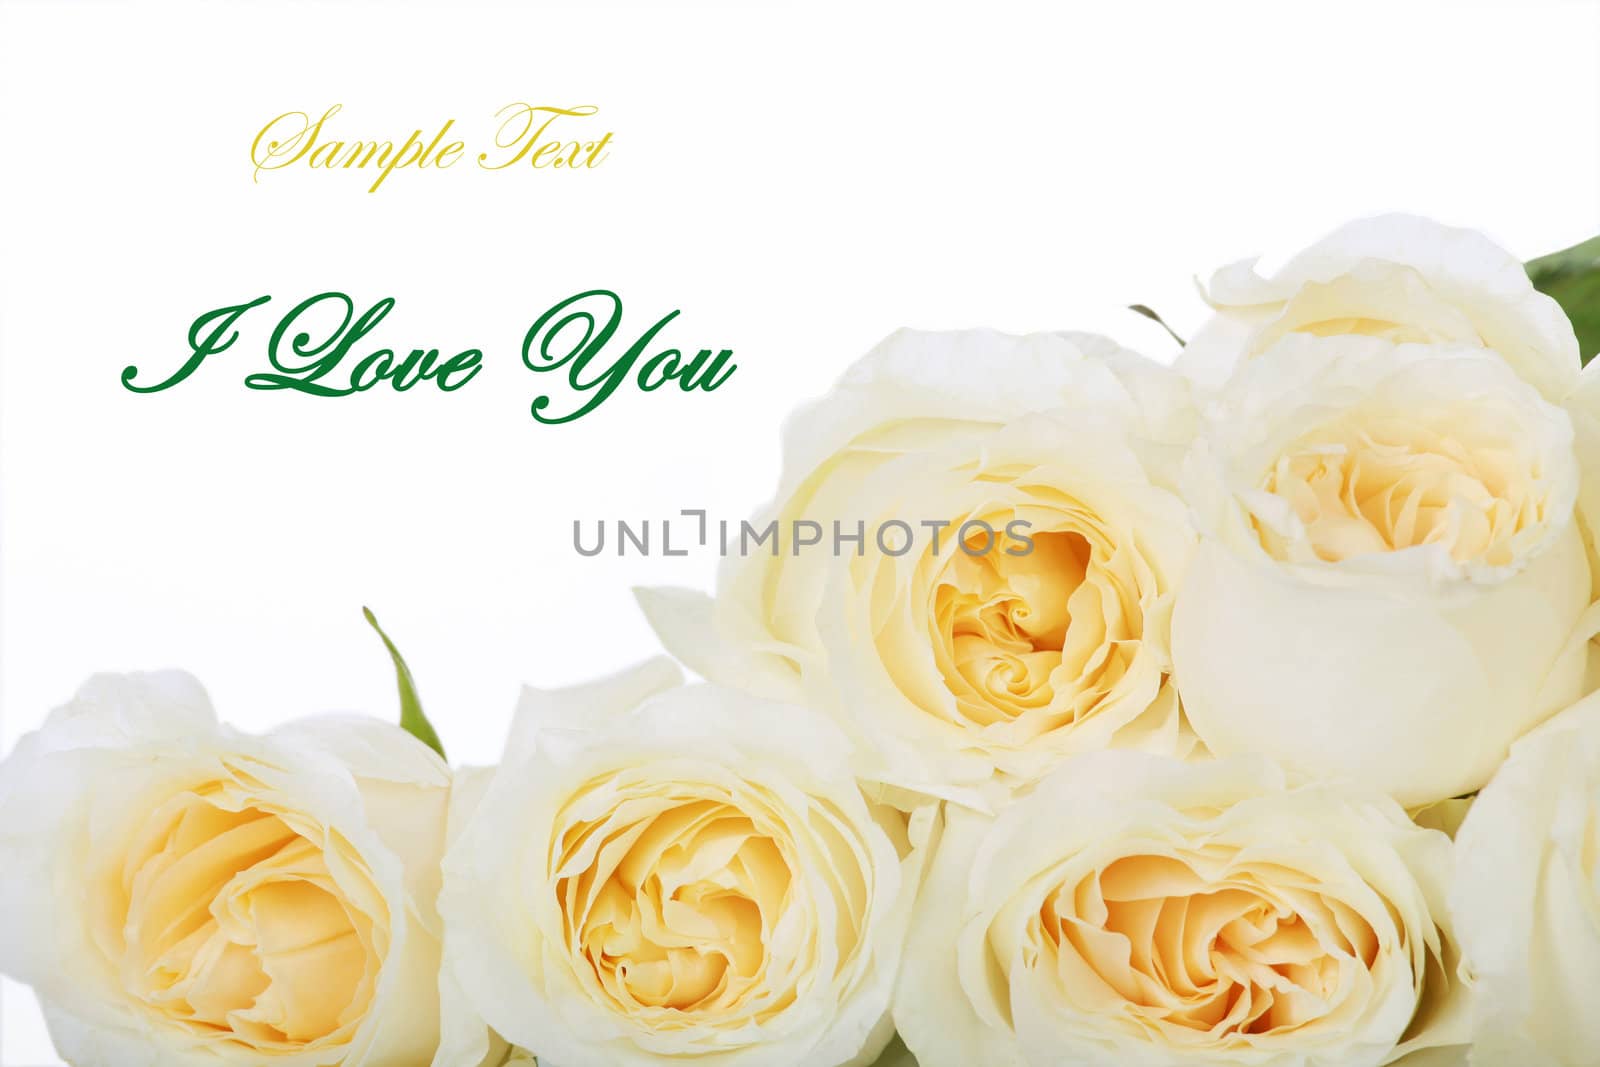 Bunch of White roses with yellow centers, type space available